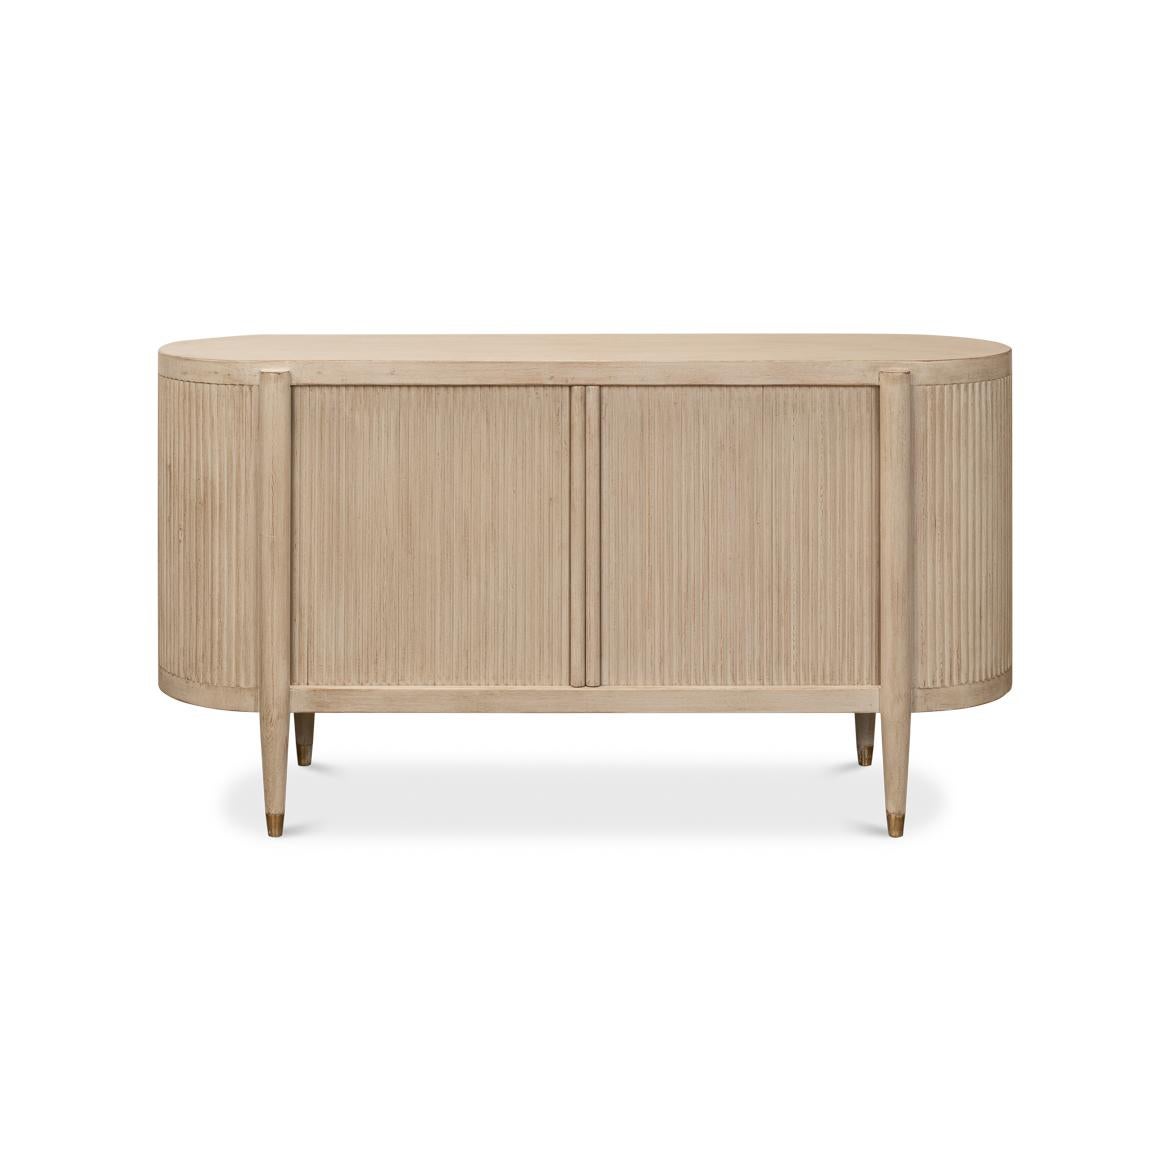 The stone gray painted finish on reclaimed pine evokes a sense of calm and natural grace, making this sideboard a versatile fit for a range of interiors, from a beach house to a contemporary urban apartment.

Practicality meets graceful design with